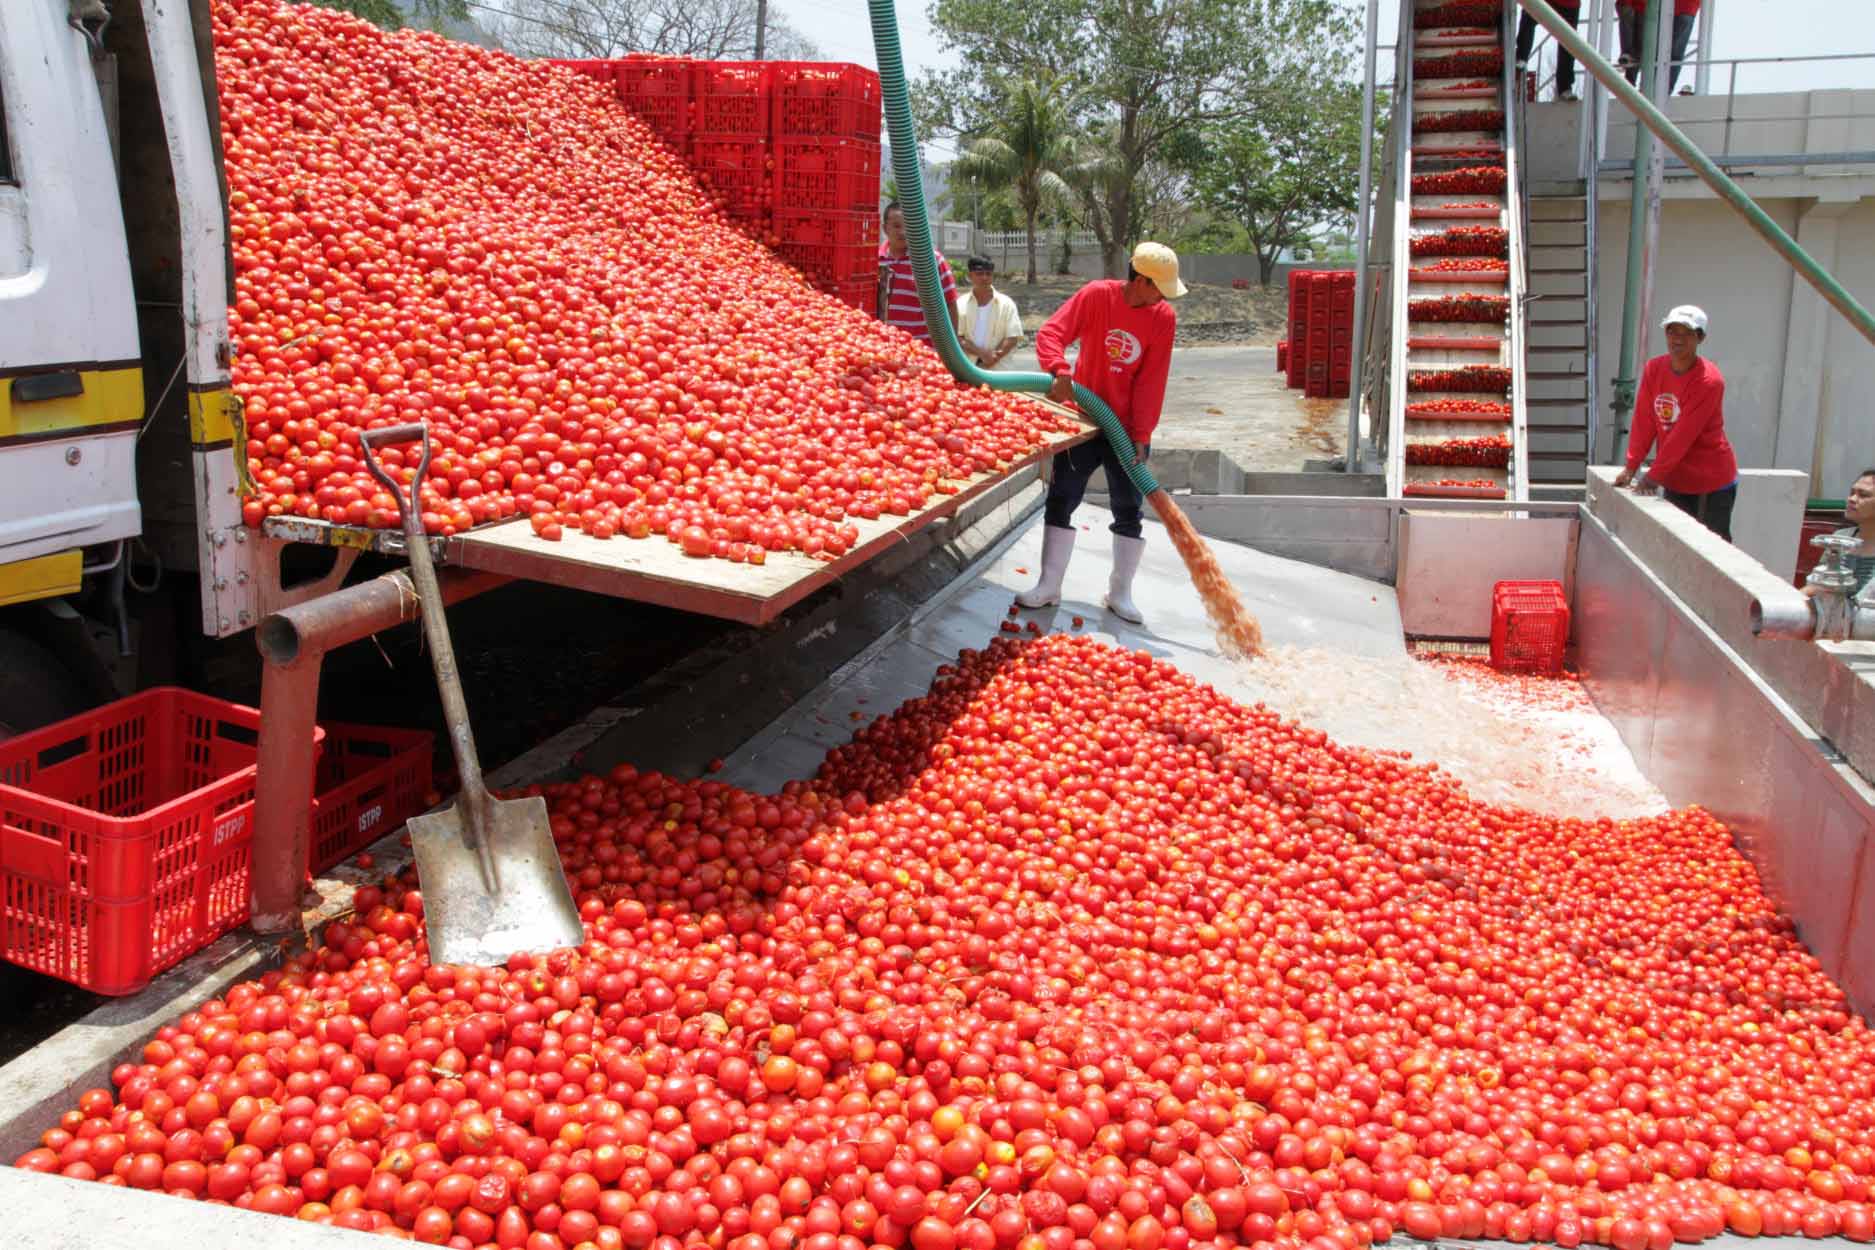 The tomato processing plant has a daily production capacity of 1,200 metric tones per day, and will primarily buy tomatoes from farmers in the Kadawa Valley in Kano state and will pay them a guaranteed price of about $700 per ton of tomatoes.